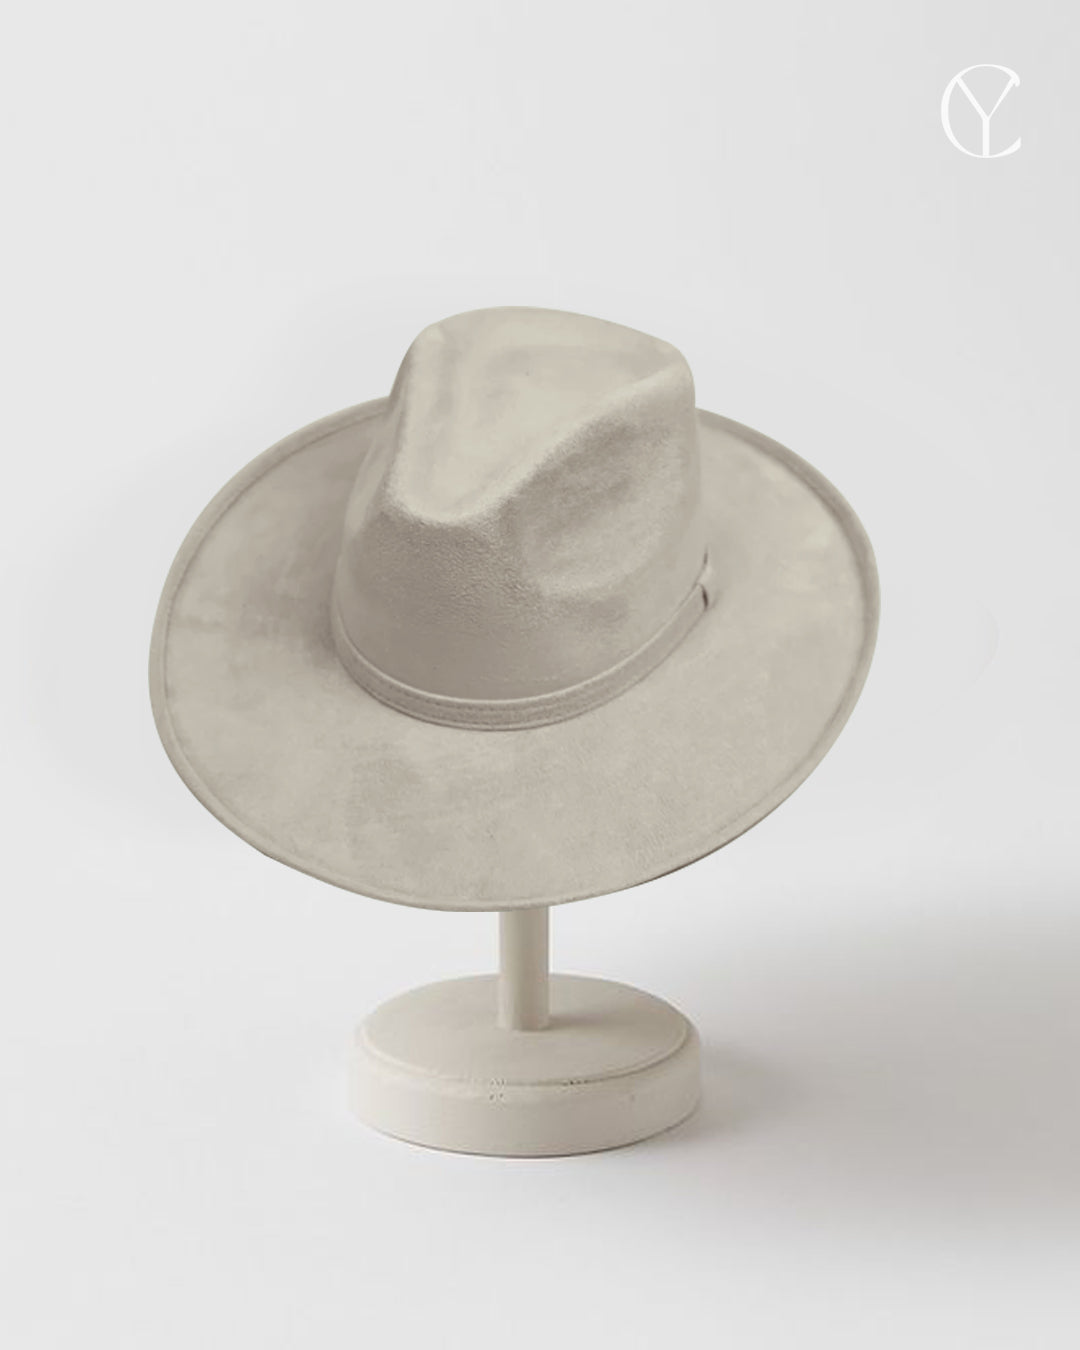 Vegan Suede Rancher Hat - Ivory (Ready to Customize)